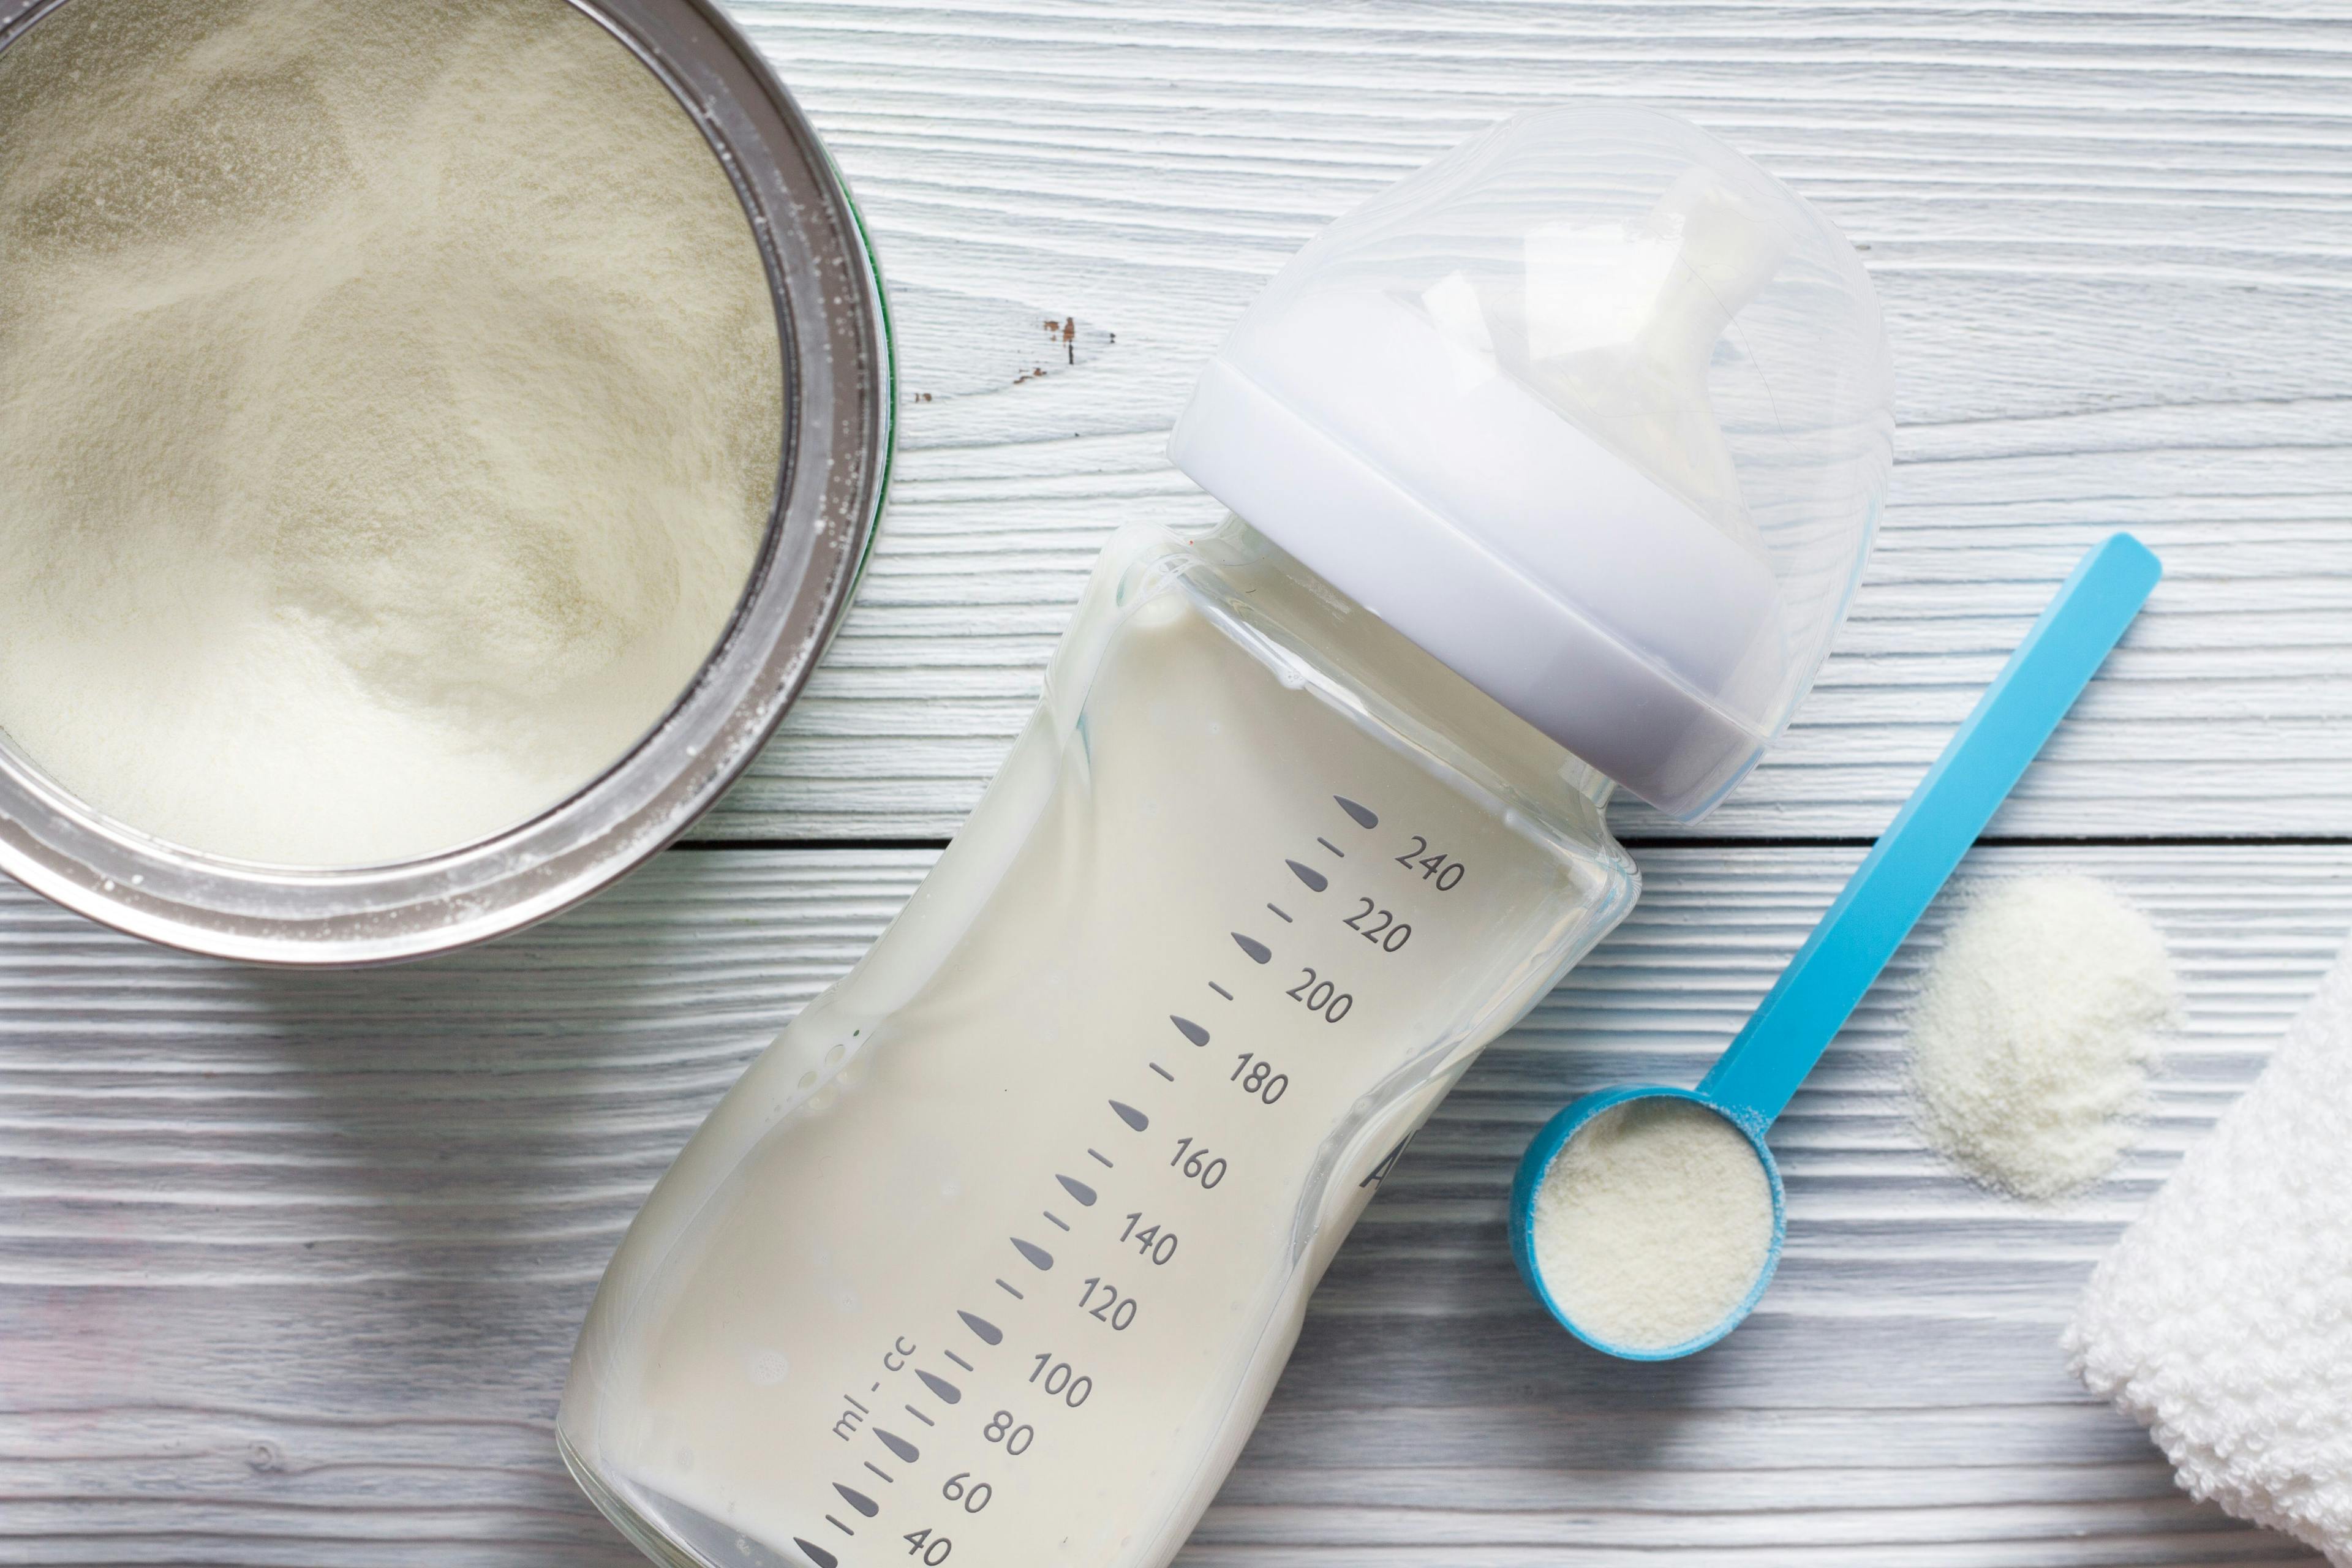 HCPs can play a role in addressing the US infant formula shortage | Image Credit: © 279photo - © 279photo - stock.adobe.com.